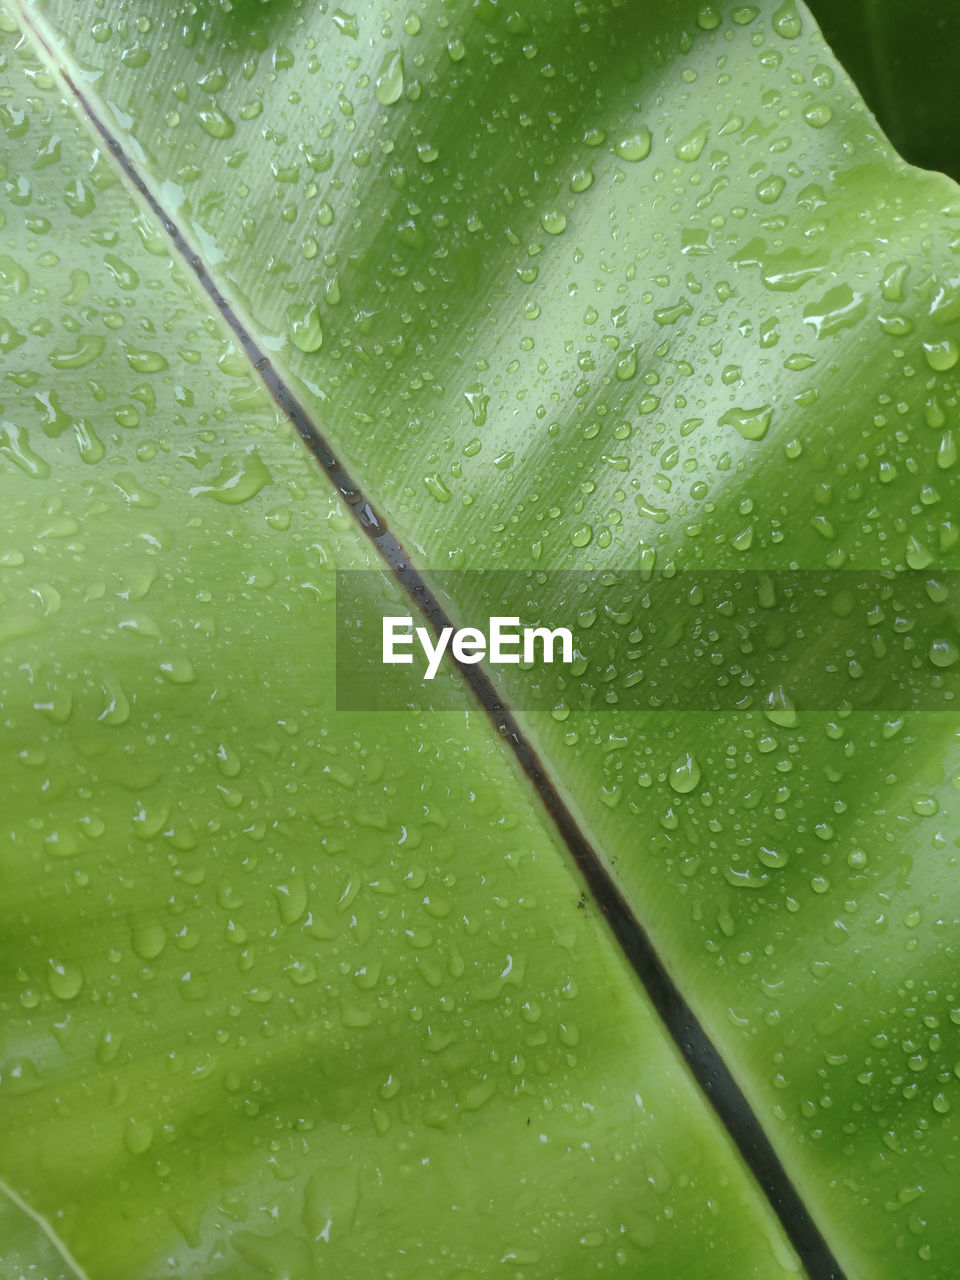 CLOSE-UP OF RAINDROPS ON LEAVES